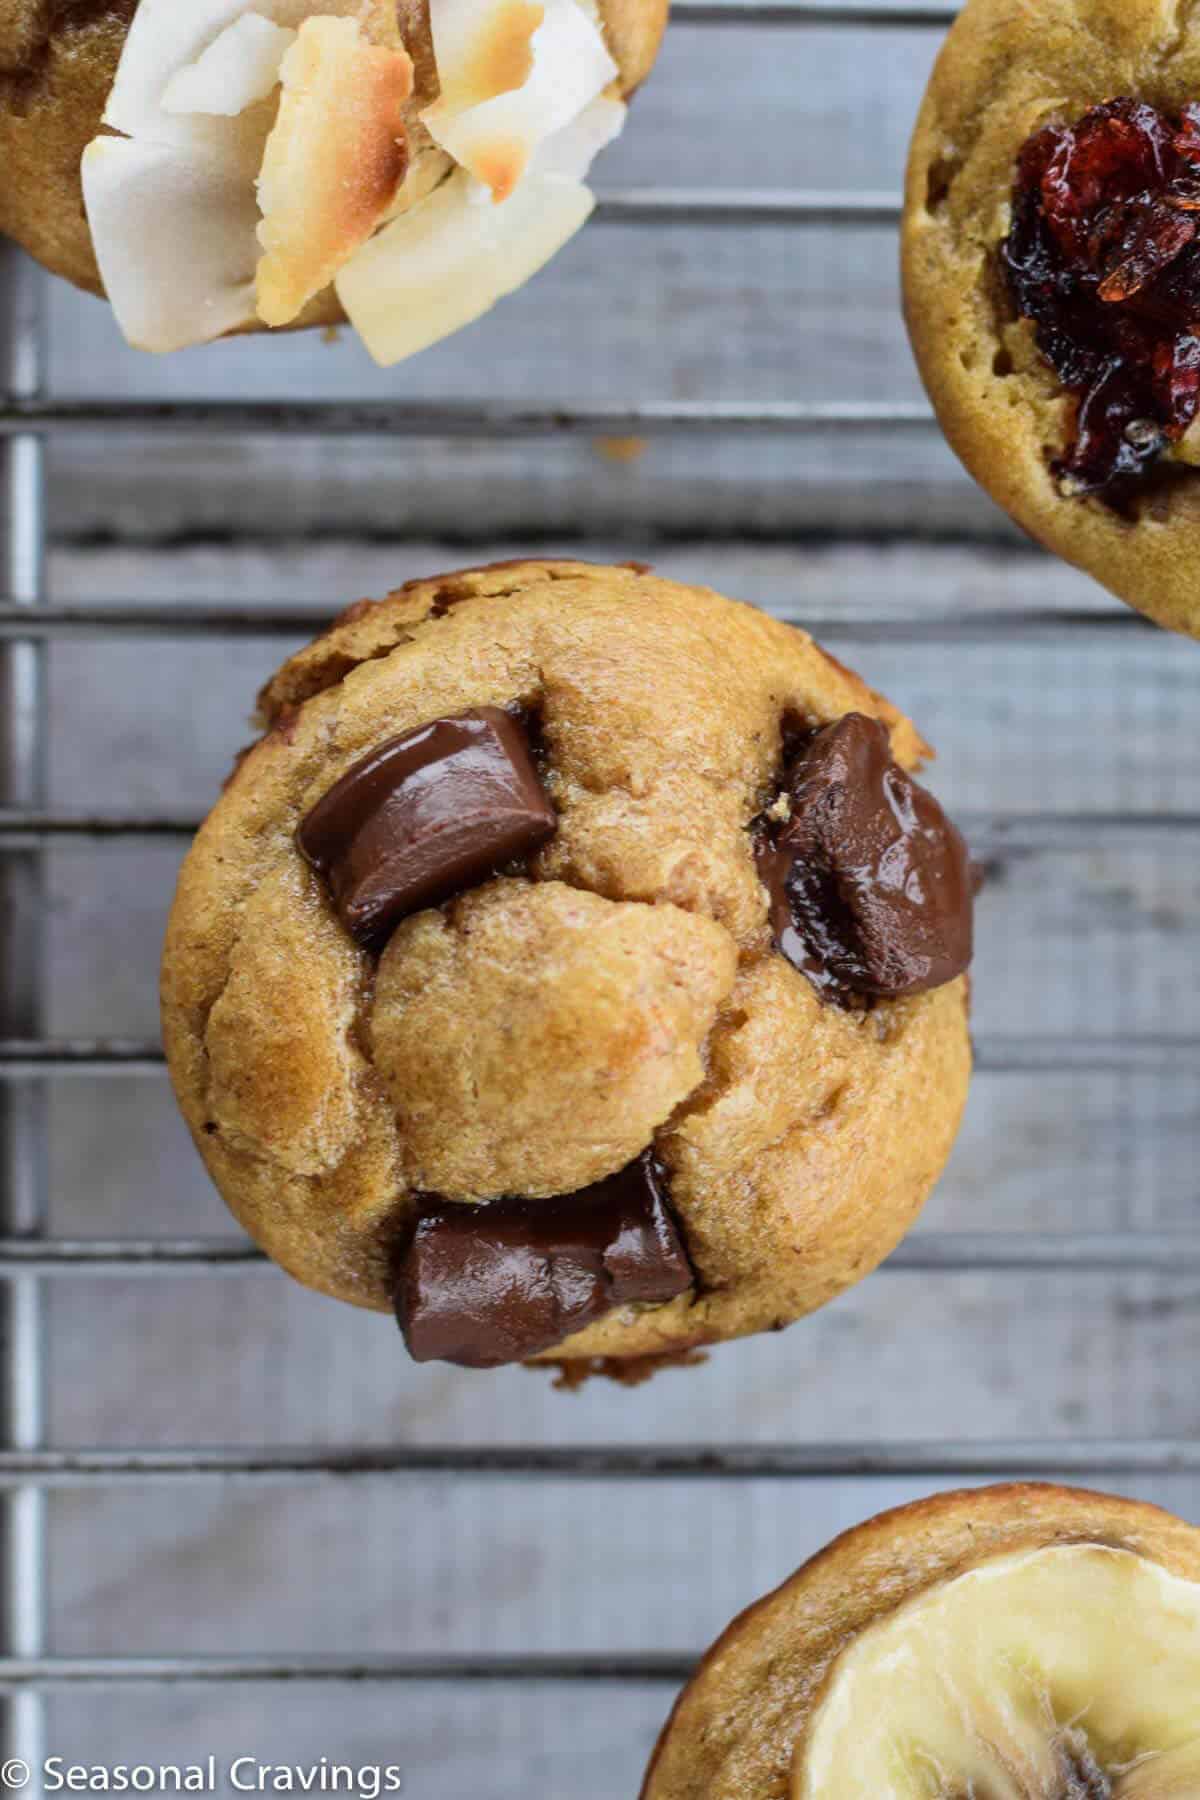  Five Ingredient Blender Muffins are a quick, healthy and gluten-free treat your family can grab and take on the run.  